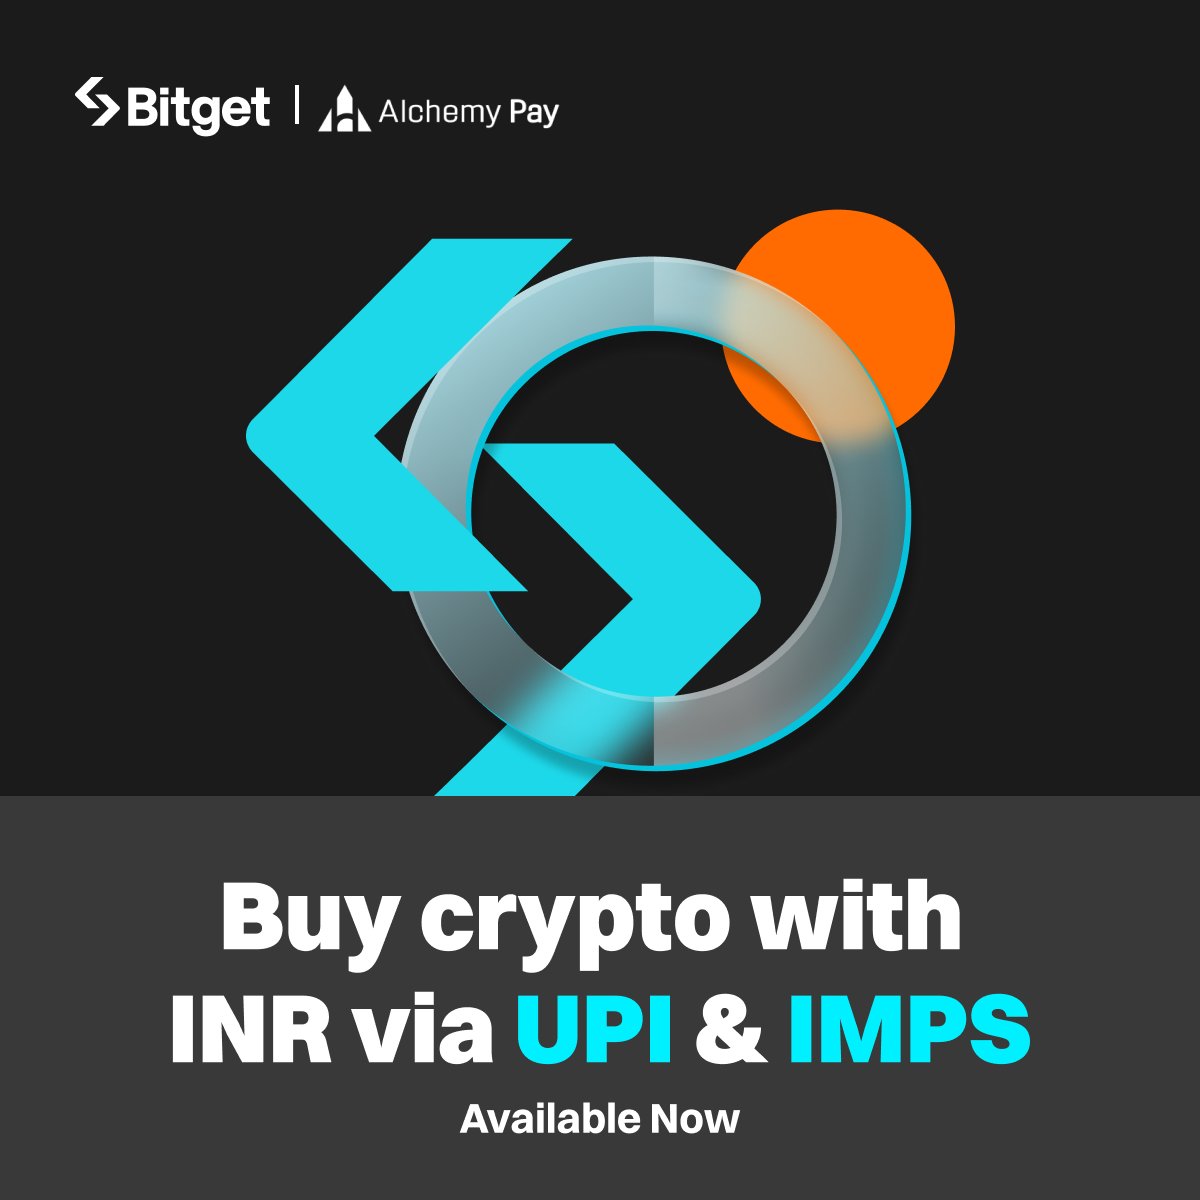 #Bitget and @AlchemyPay have joined forces to provide top-tier #crypto payment solutions for INR through UPI and IMPS (bank transfer)!

Buy crypto now 👉 bitget.com/support/articl…